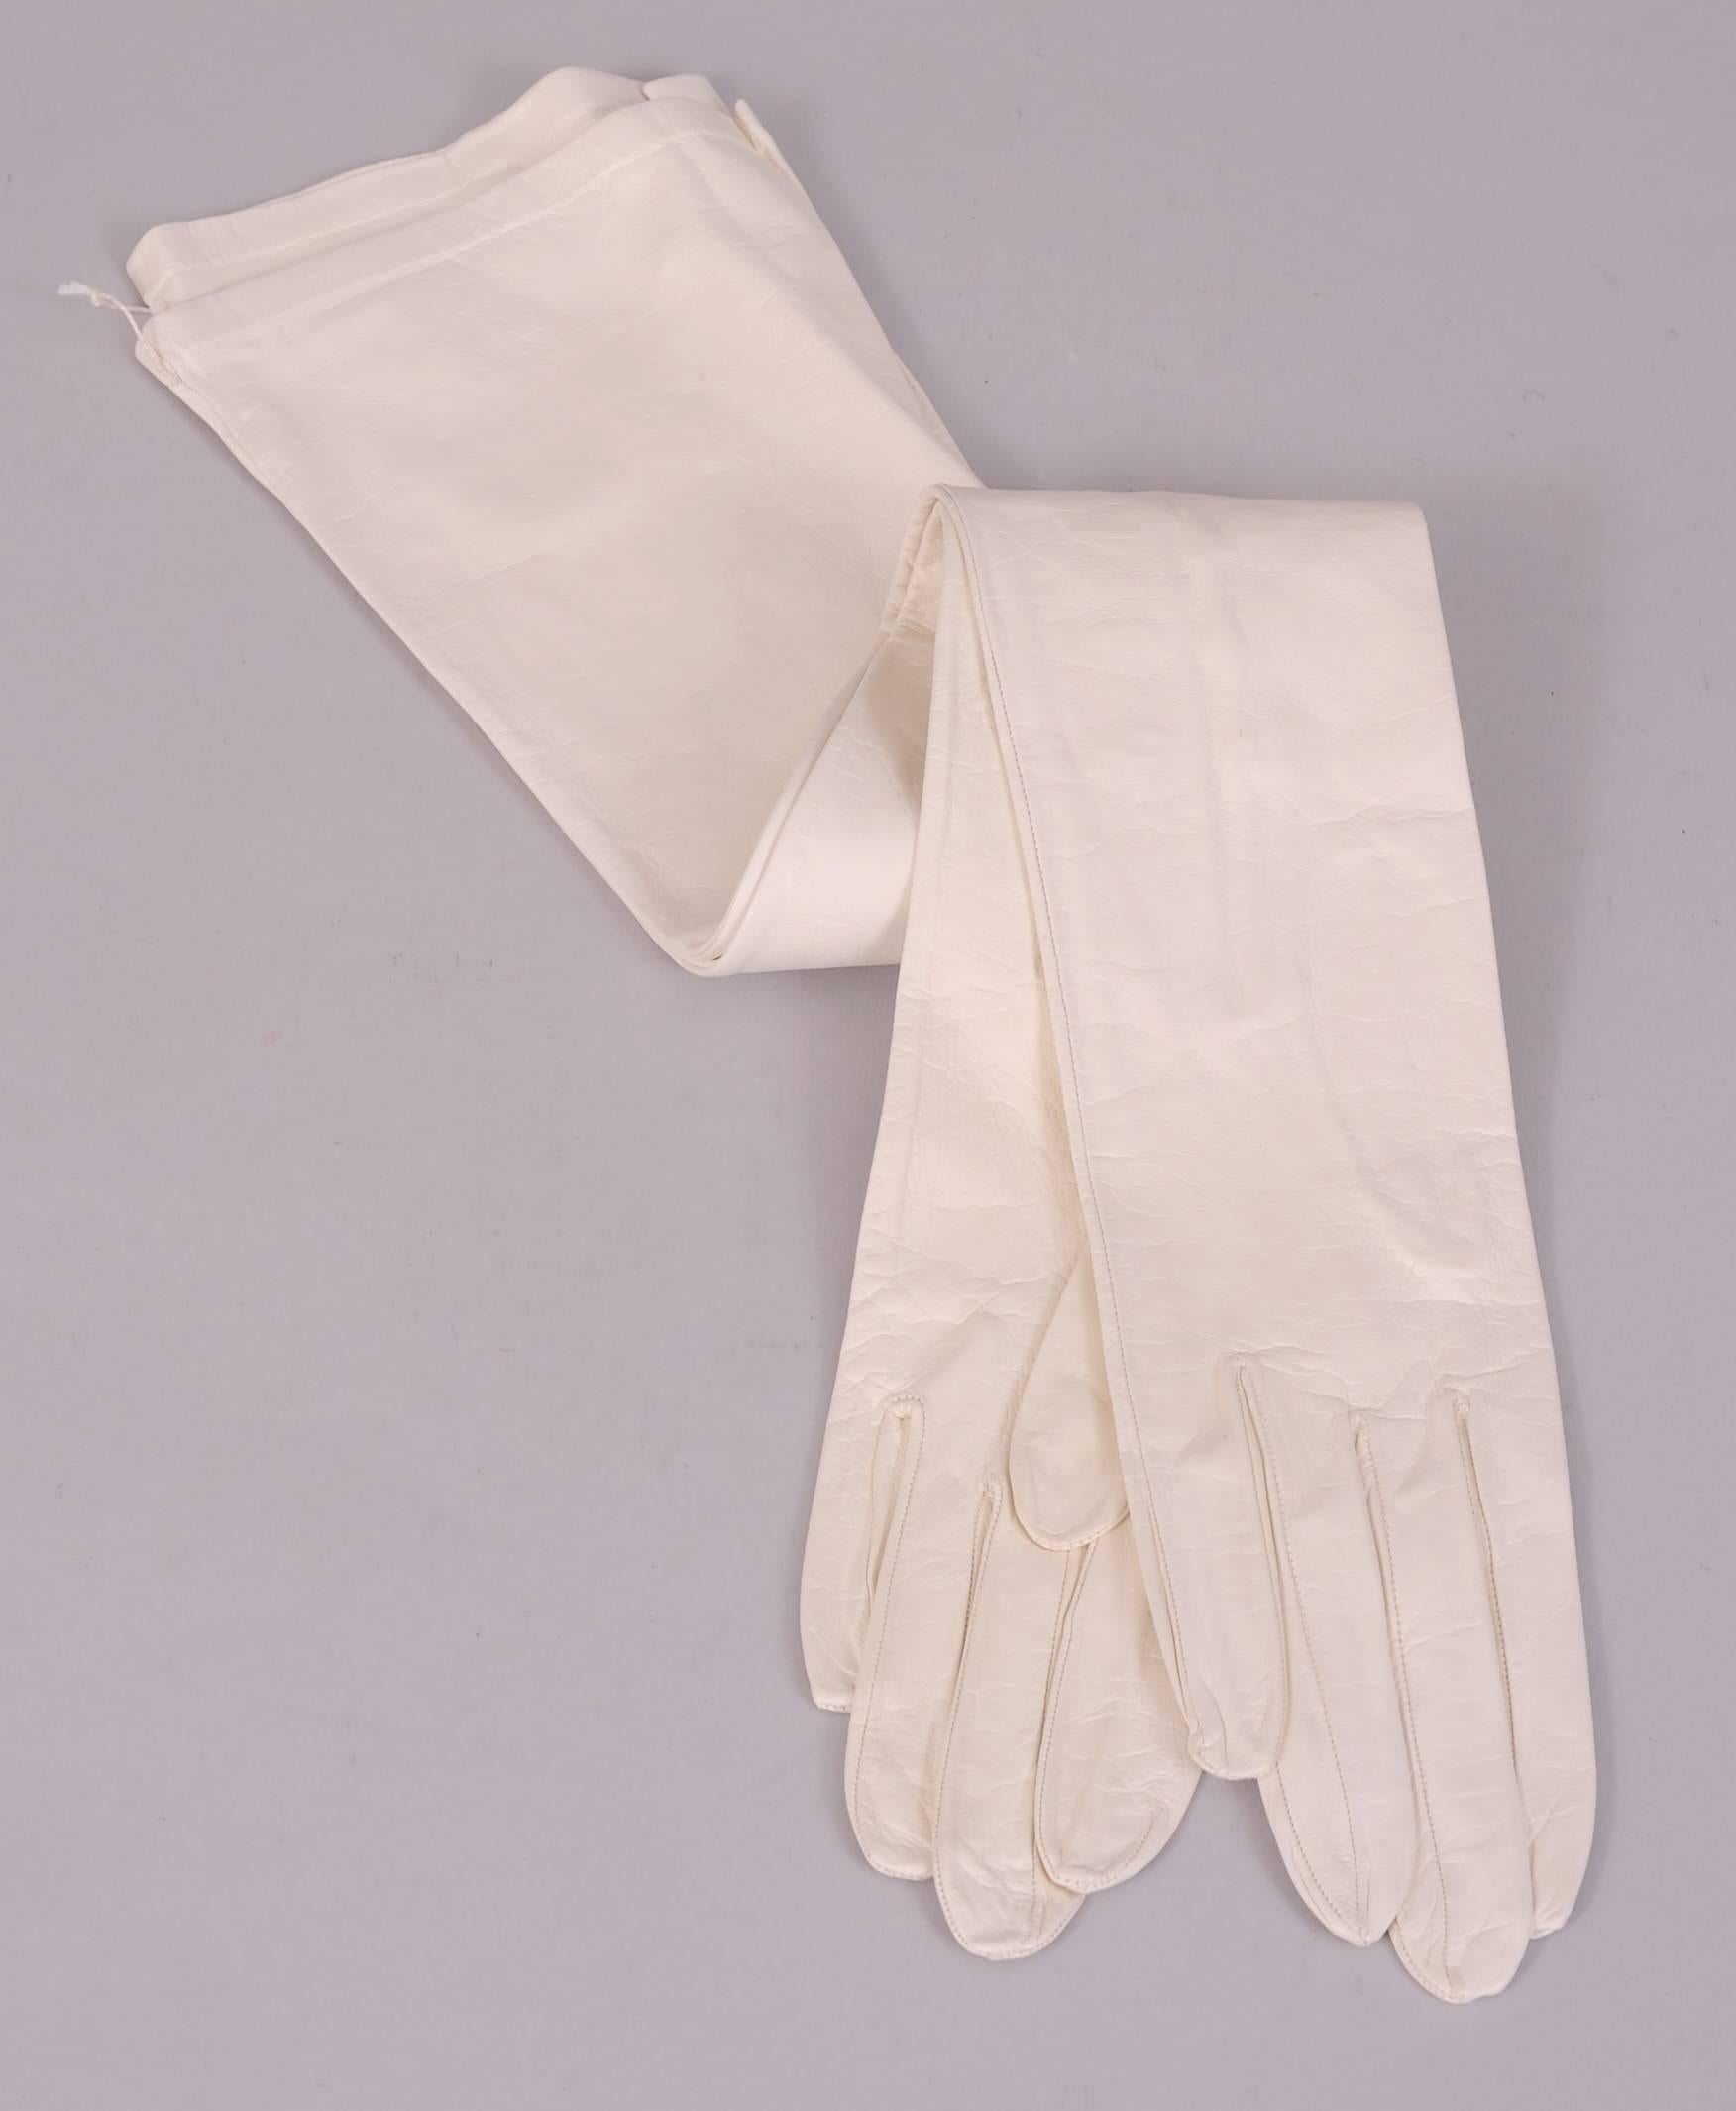 Made in France for Saks Fifth Avenue, these white kid gloves are in pristine condition. They are still sewn together as if they just left the store. There are three kid buttons at the wrist and the gloves are marked a size 6 1/2. Your glove size is